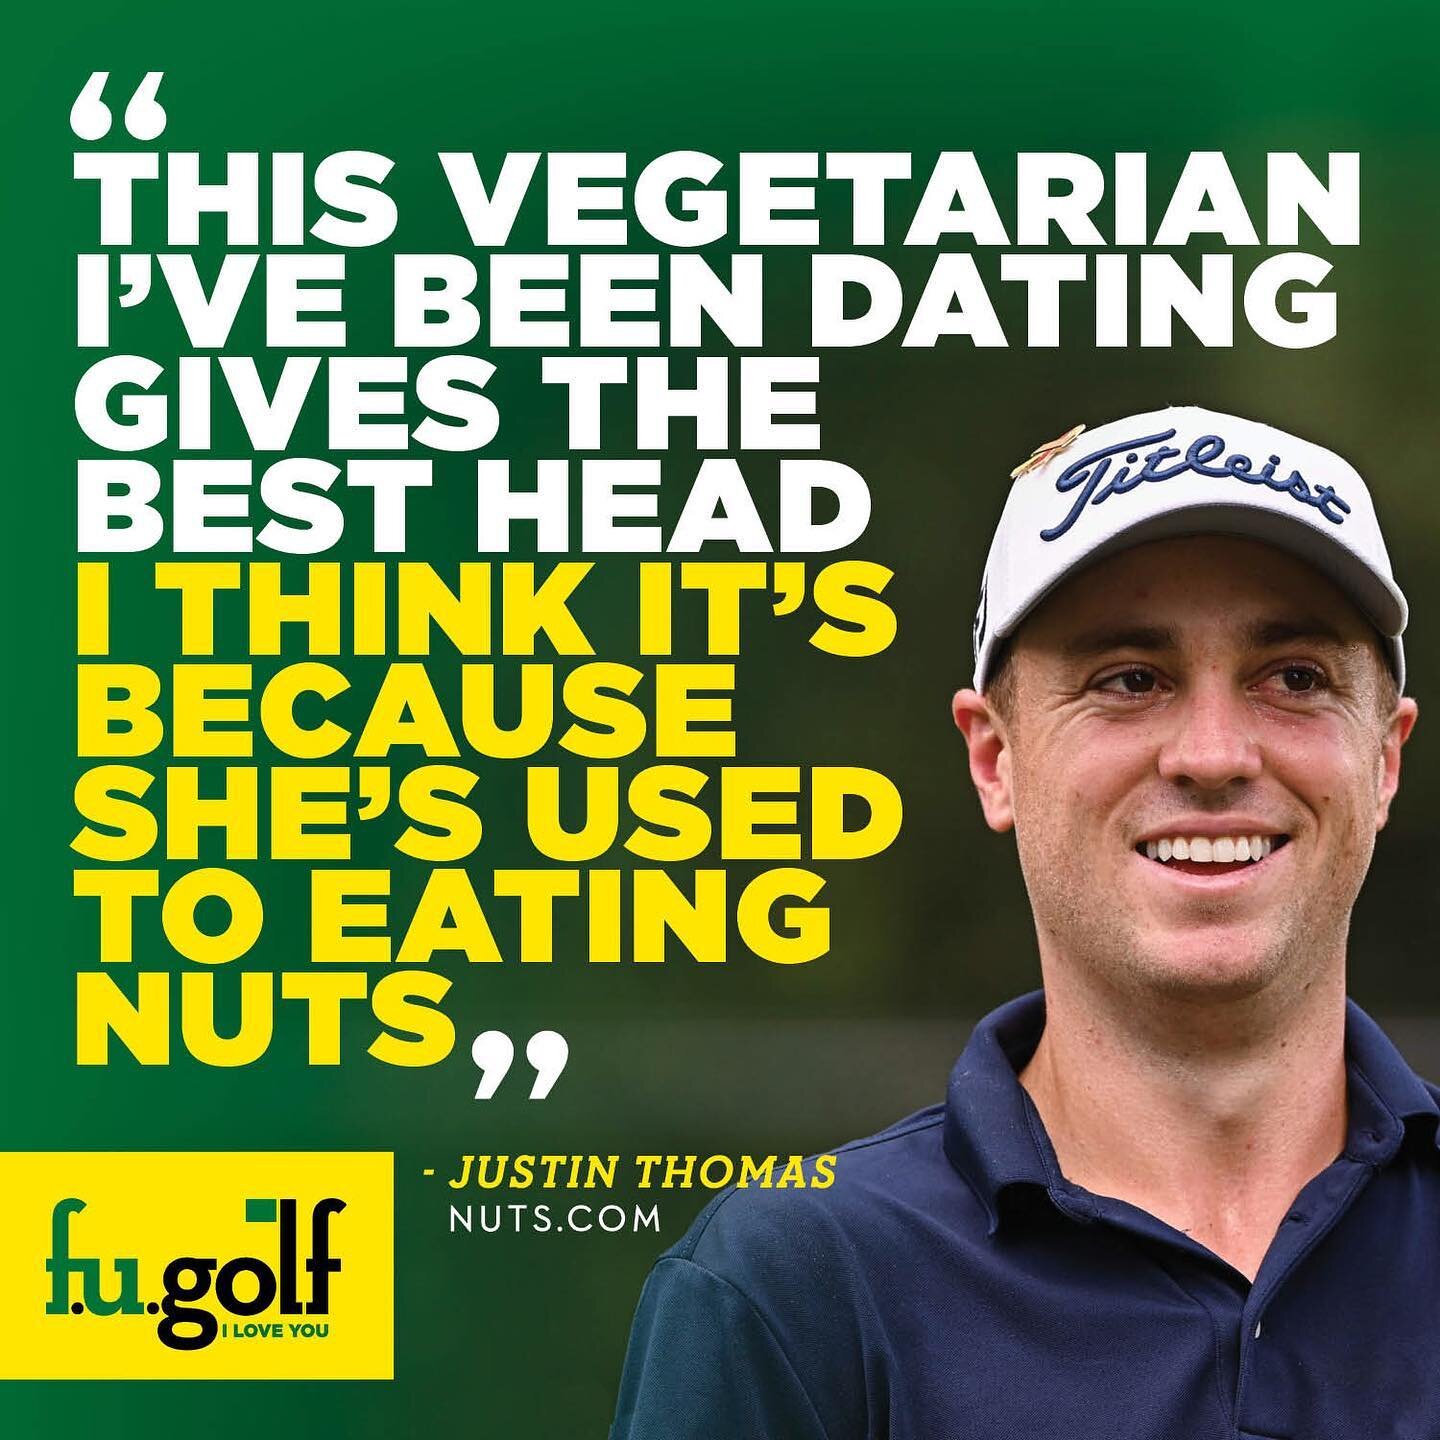 @justinthomas34 replaced his cologne with patchouli oil and now cruises the buffet at Whole Foods #vegesexual #vegicurious #saladshooter